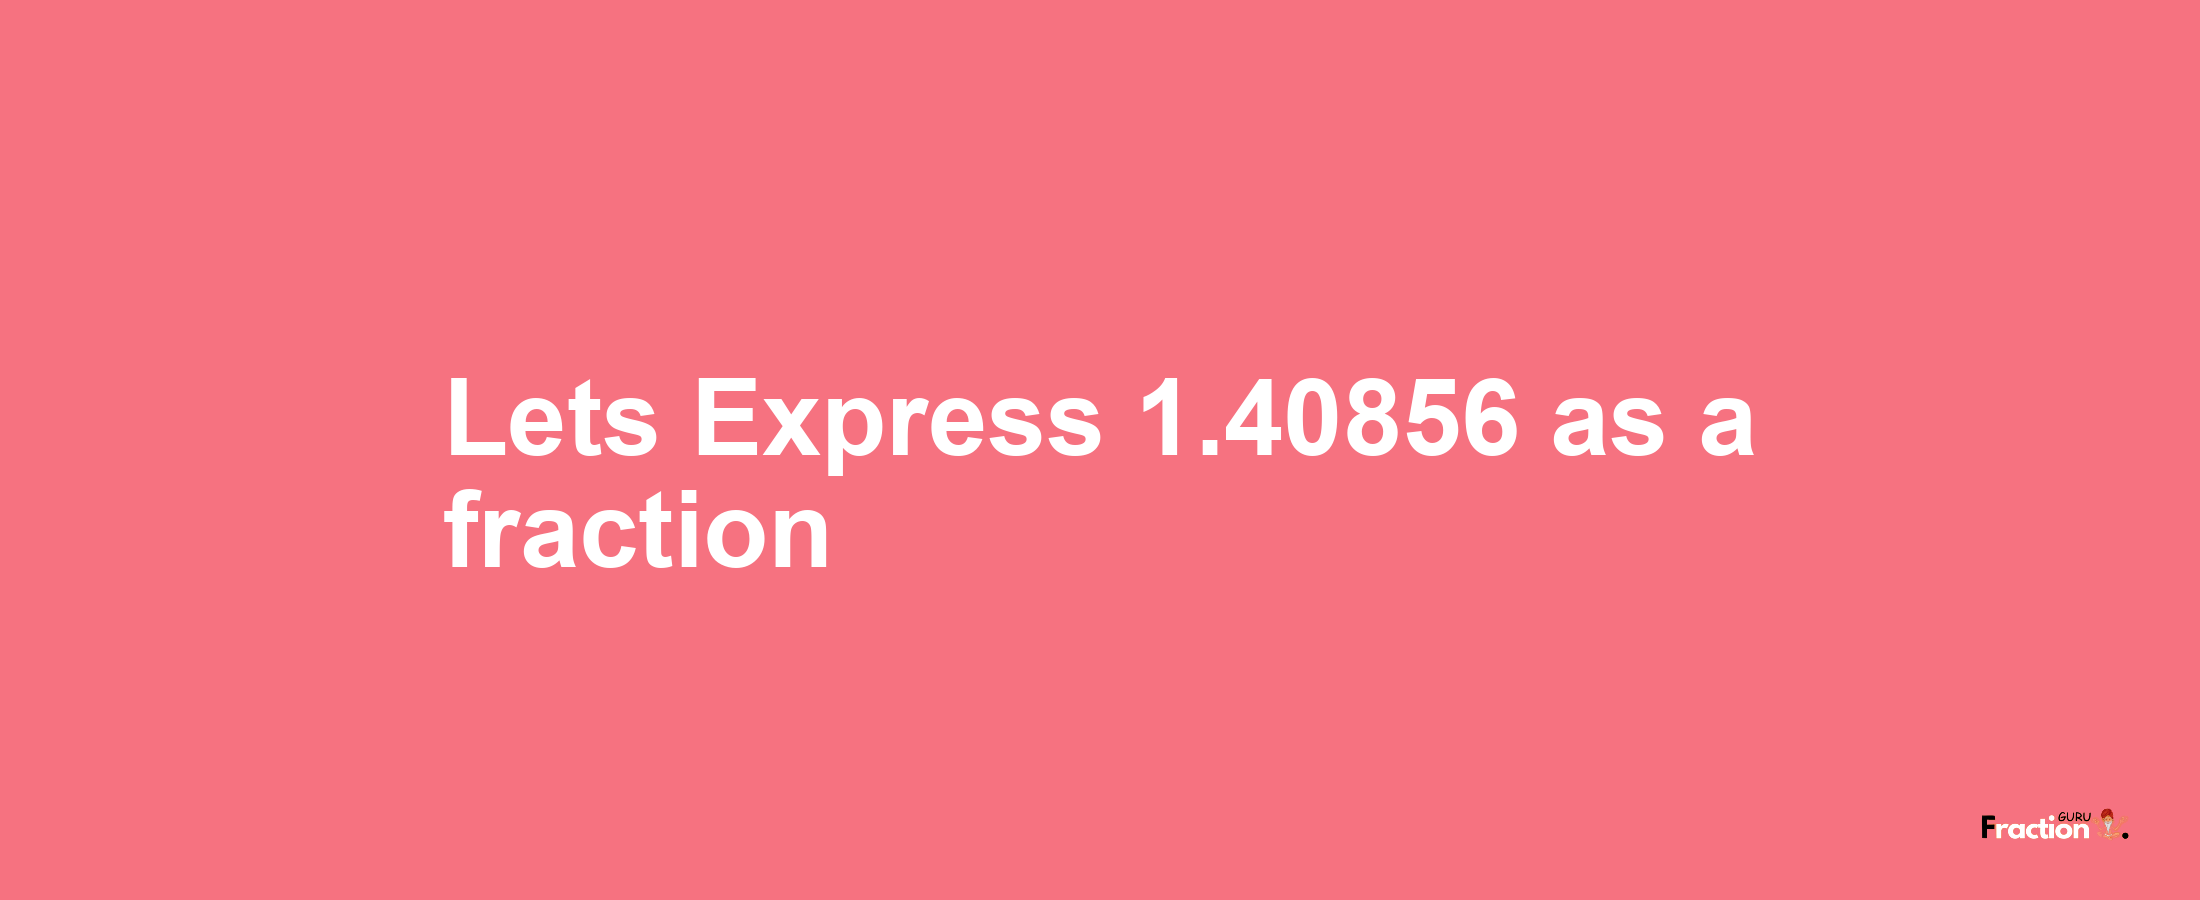 Lets Express 1.40856 as afraction